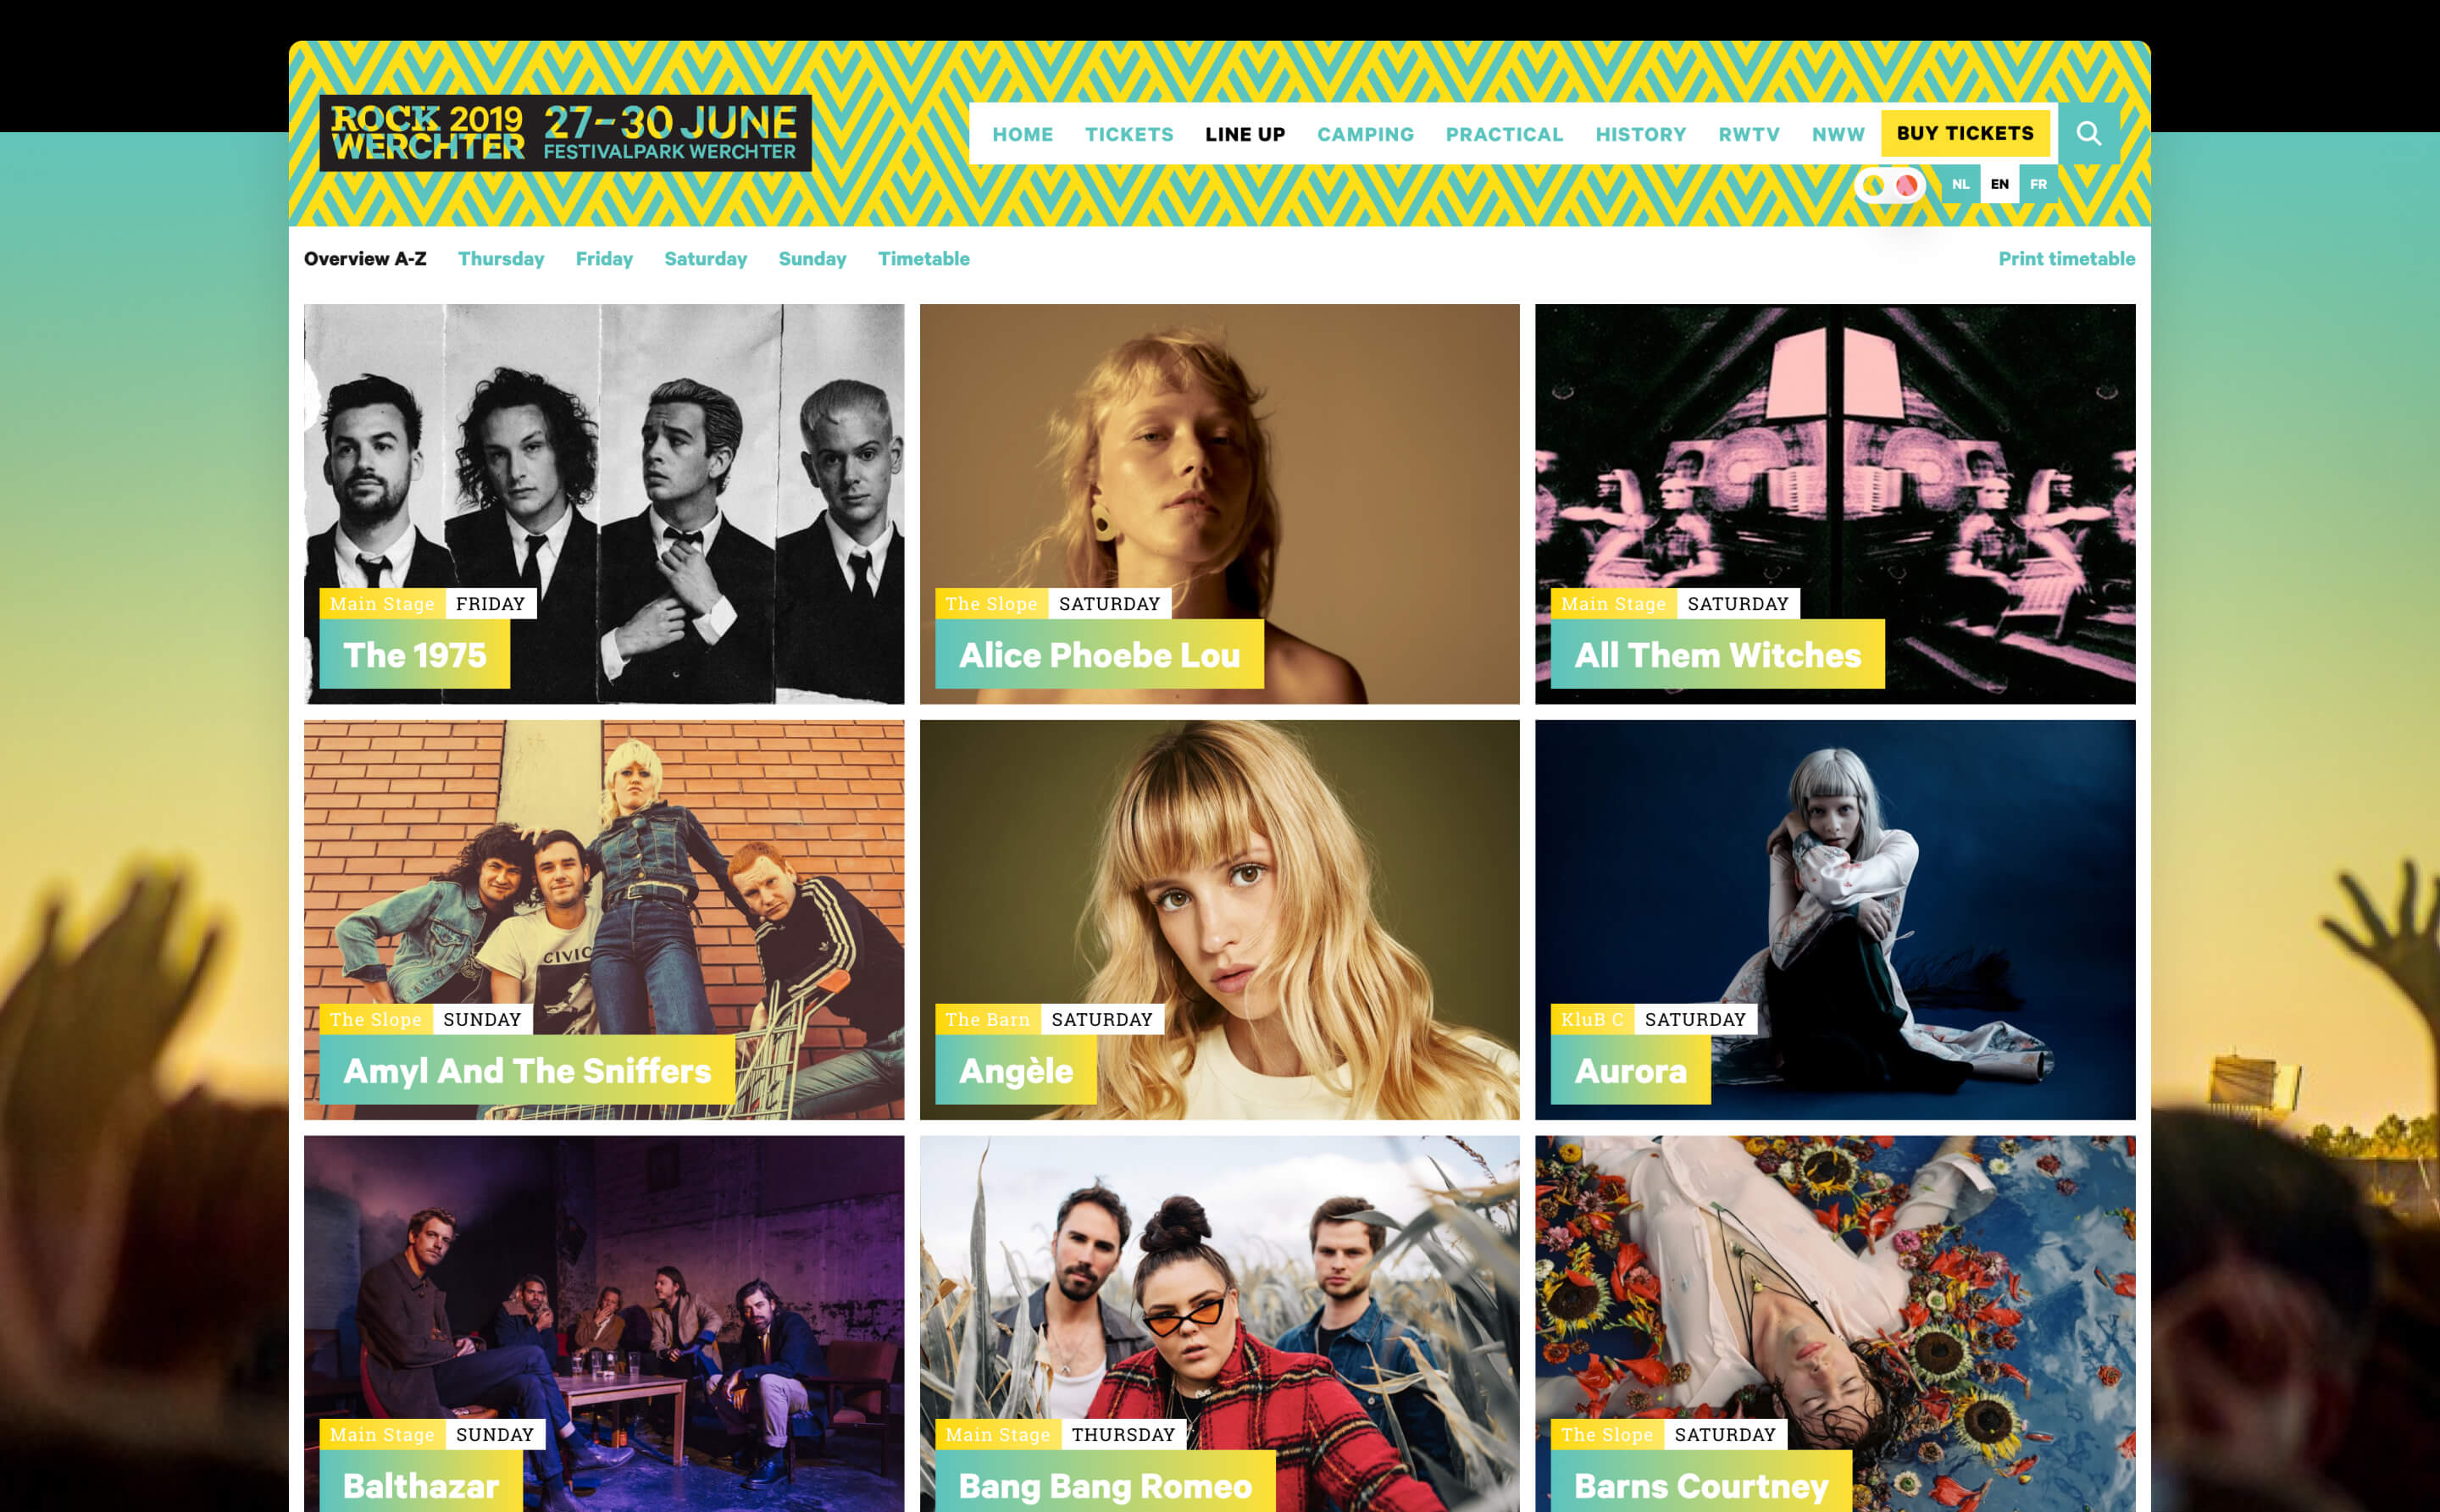 Mockup of the Rock Werchter line-up page